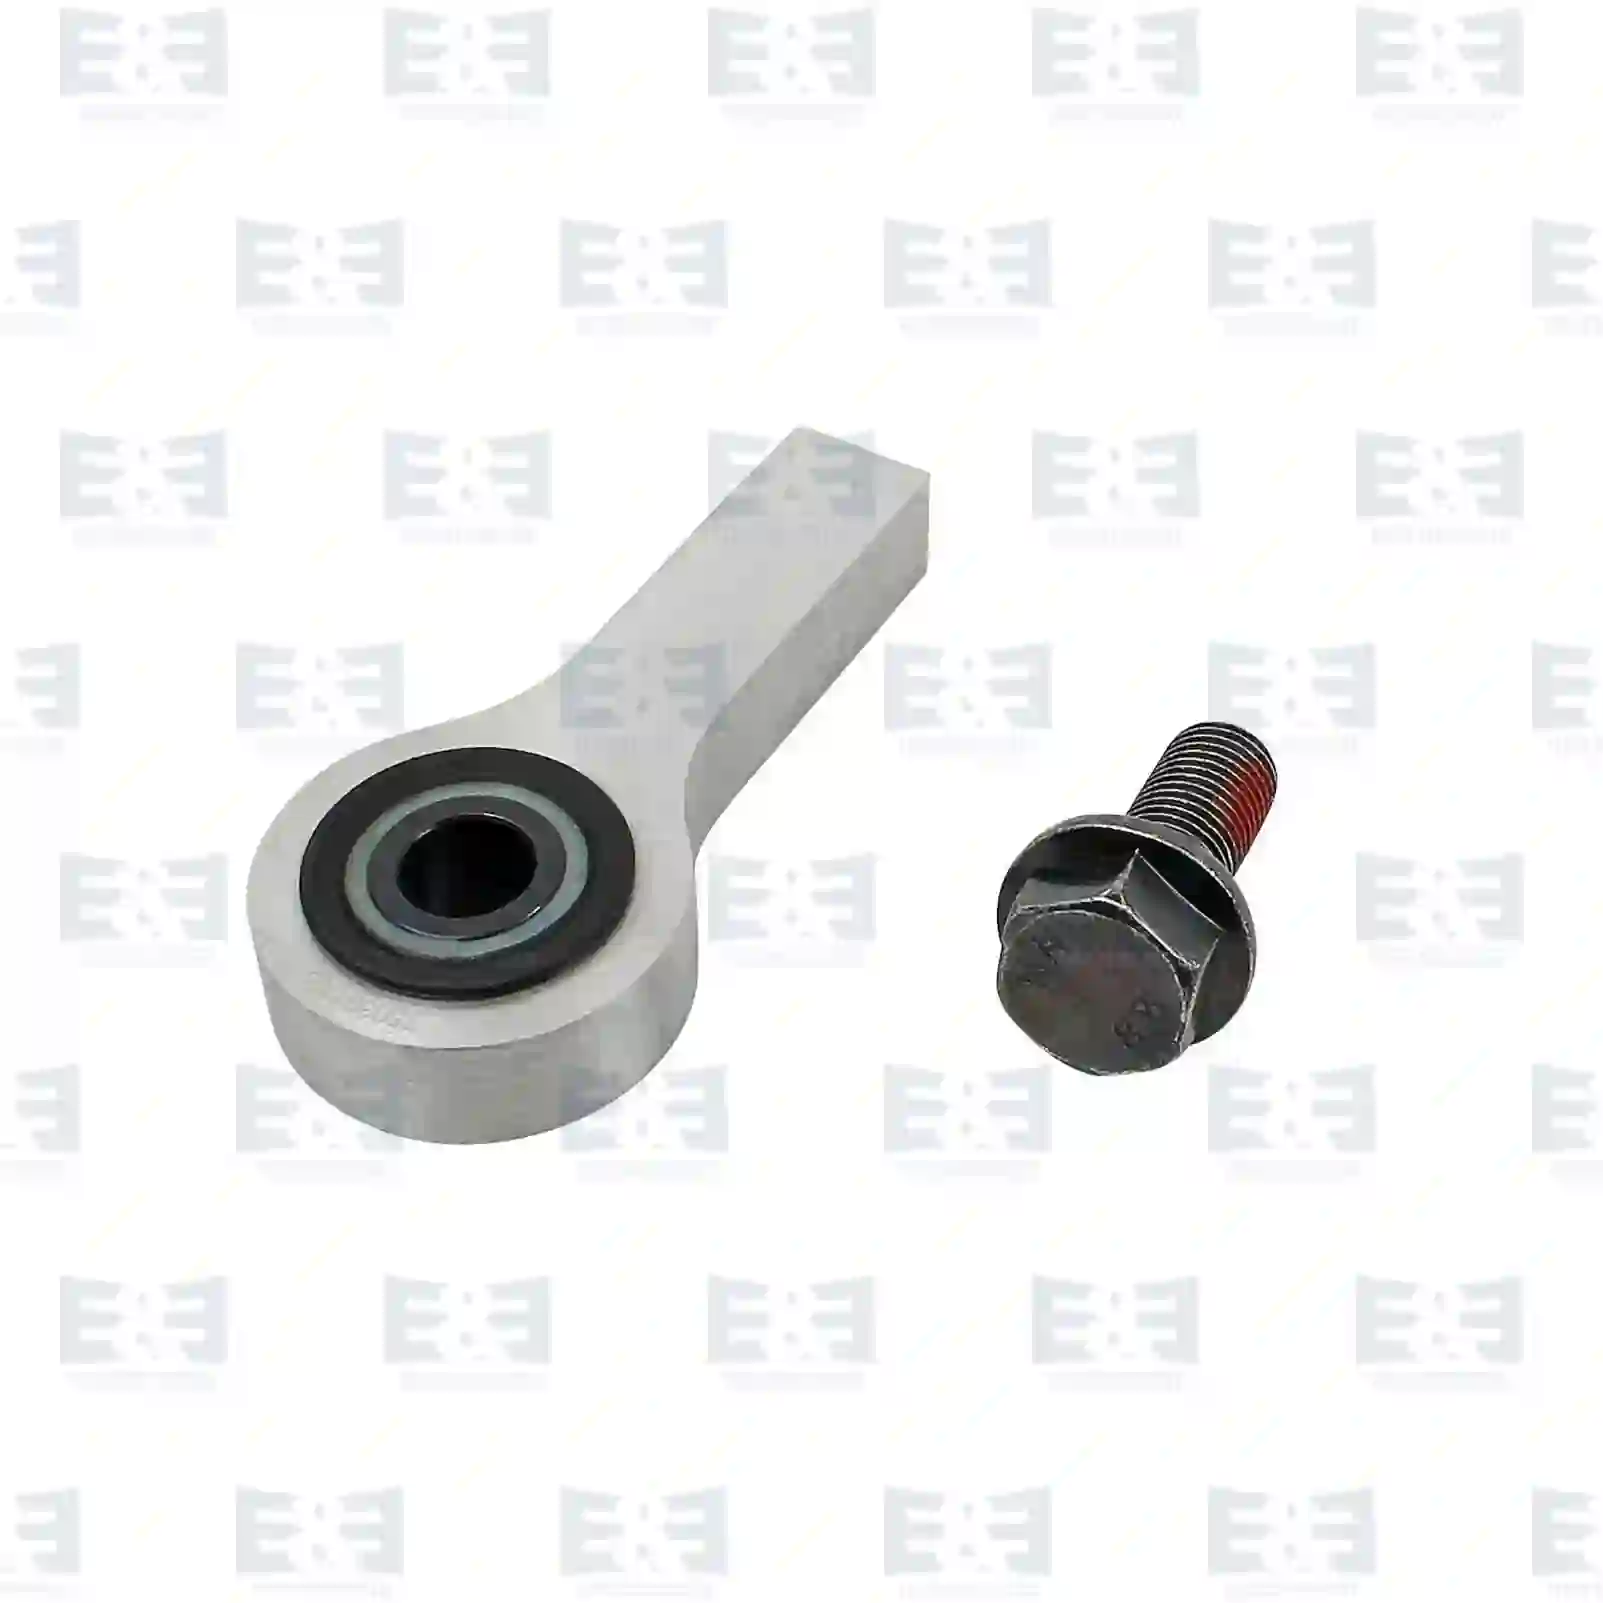 Bearing joint, complete with seal rings, 2E2274907, 2171715 ||  2E2274907 E&E Truck Spare Parts | Truck Spare Parts, Auotomotive Spare Parts Bearing joint, complete with seal rings, 2E2274907, 2171715 ||  2E2274907 E&E Truck Spare Parts | Truck Spare Parts, Auotomotive Spare Parts